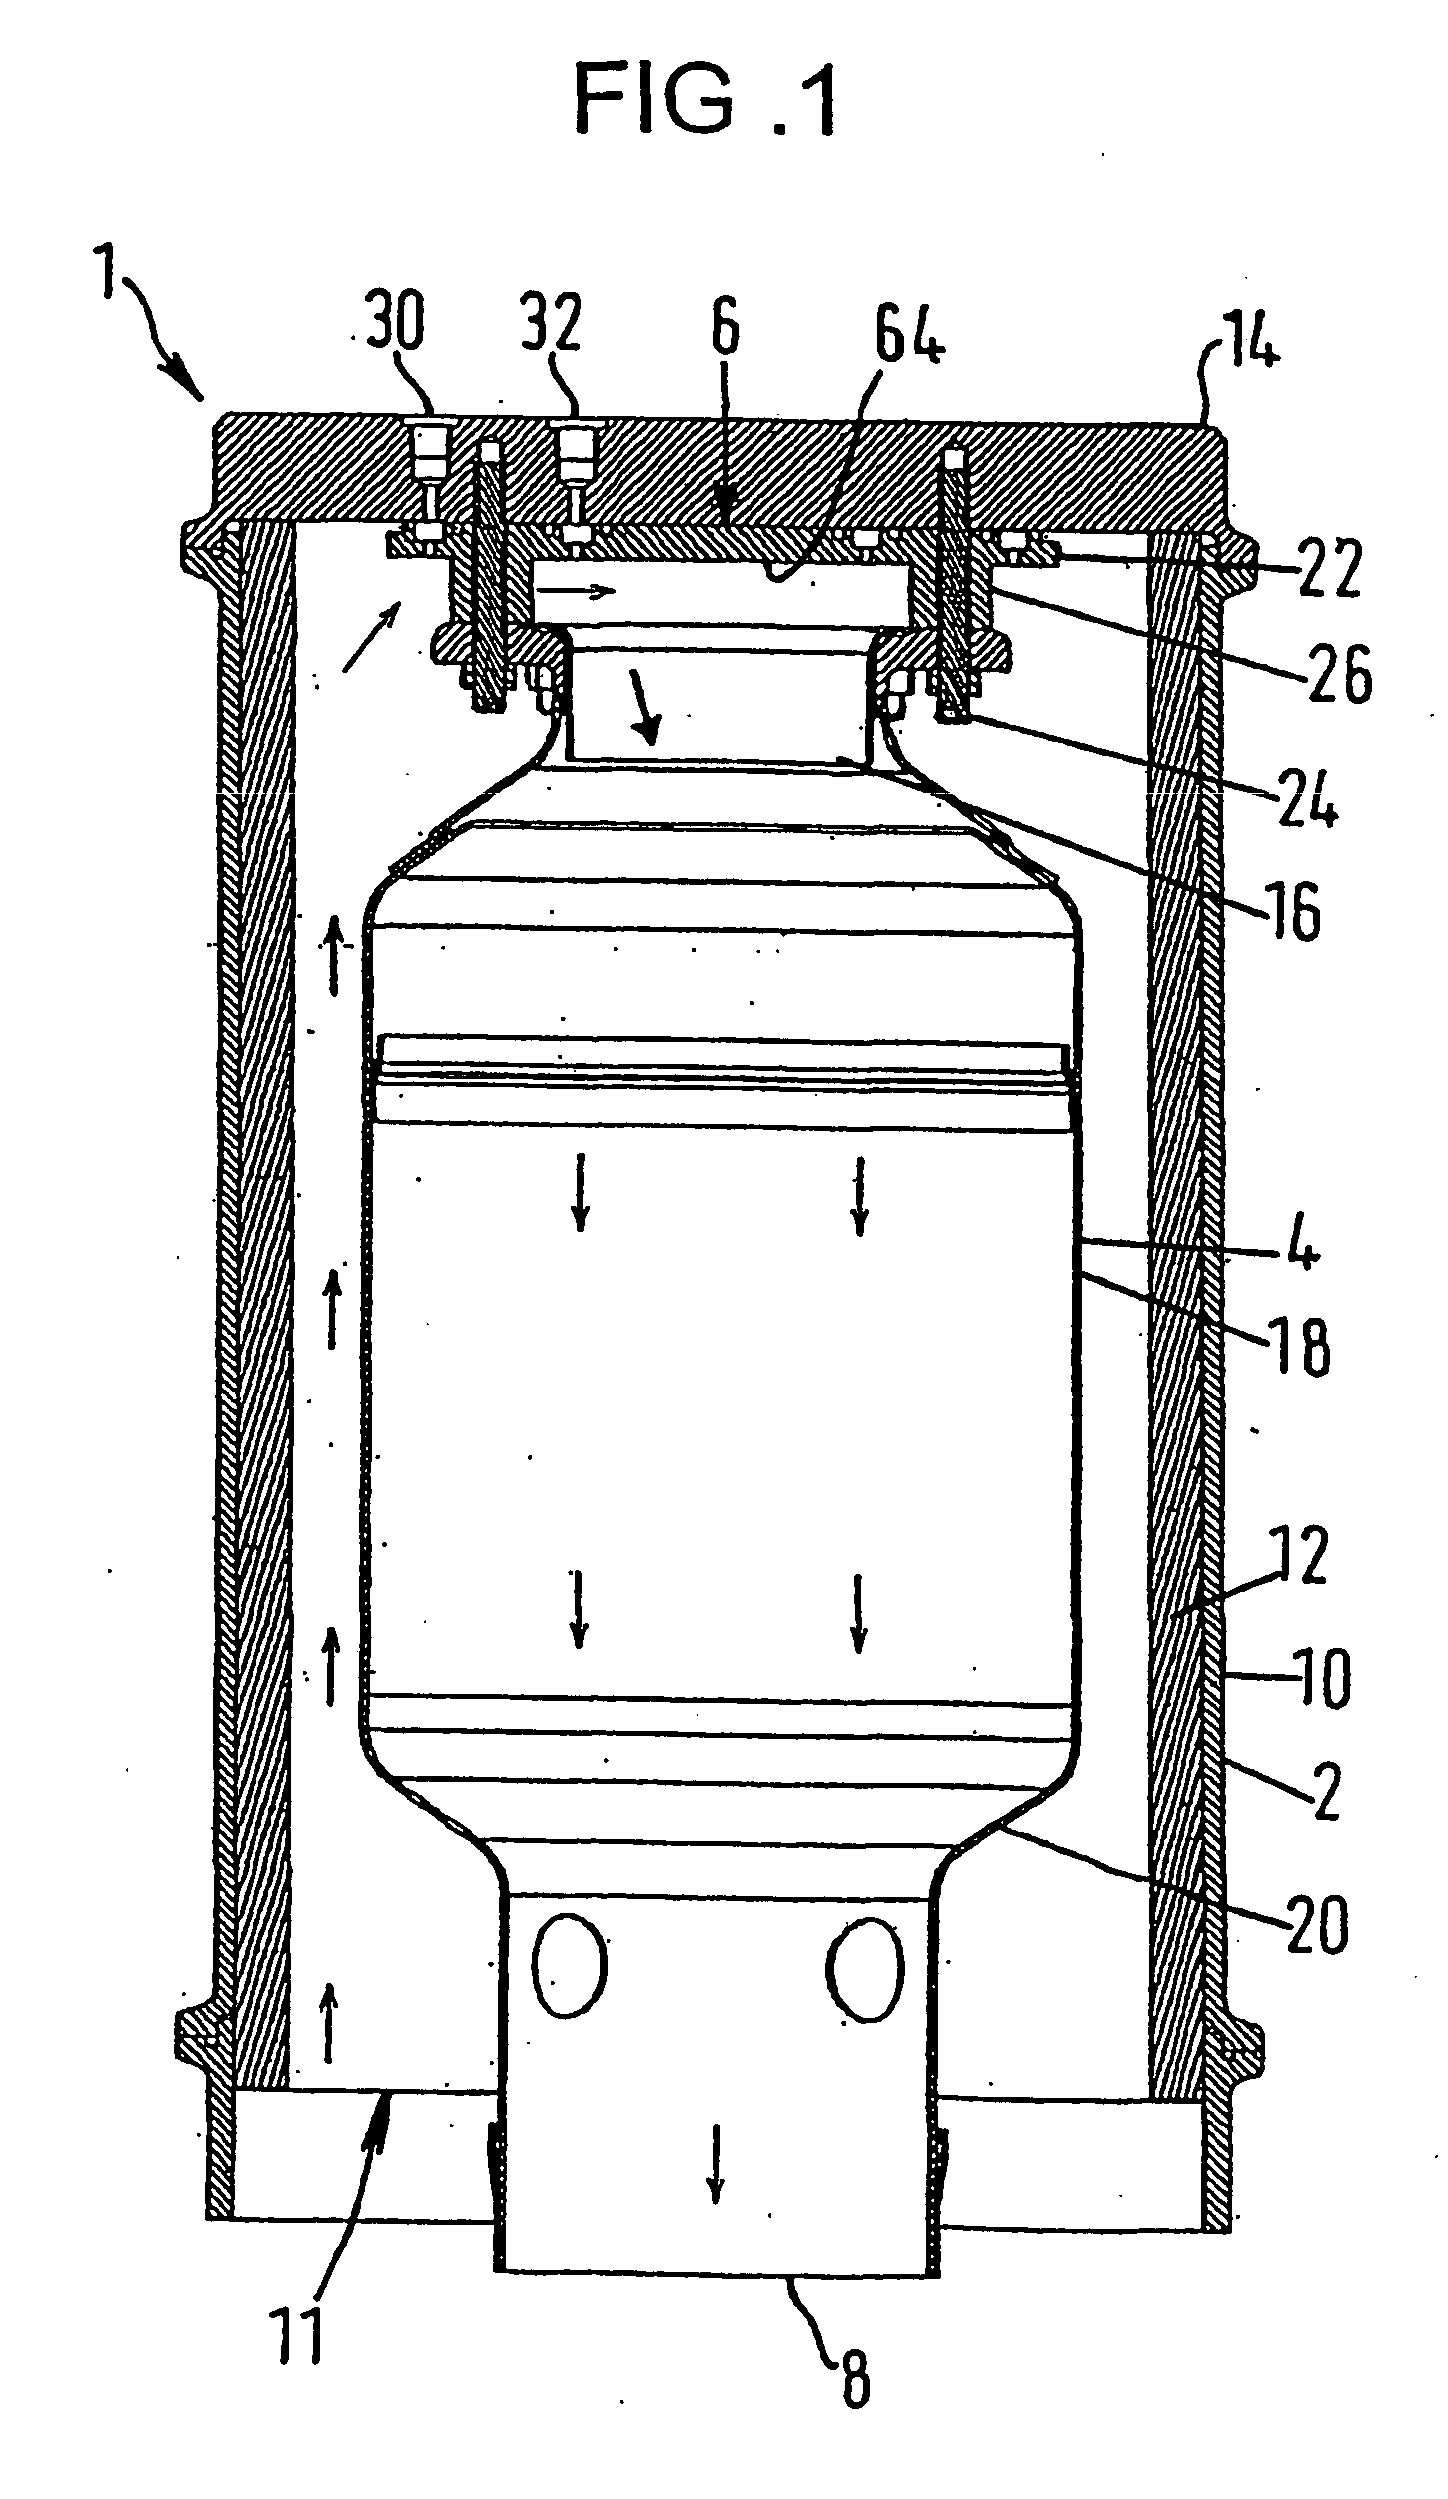 Combustion device